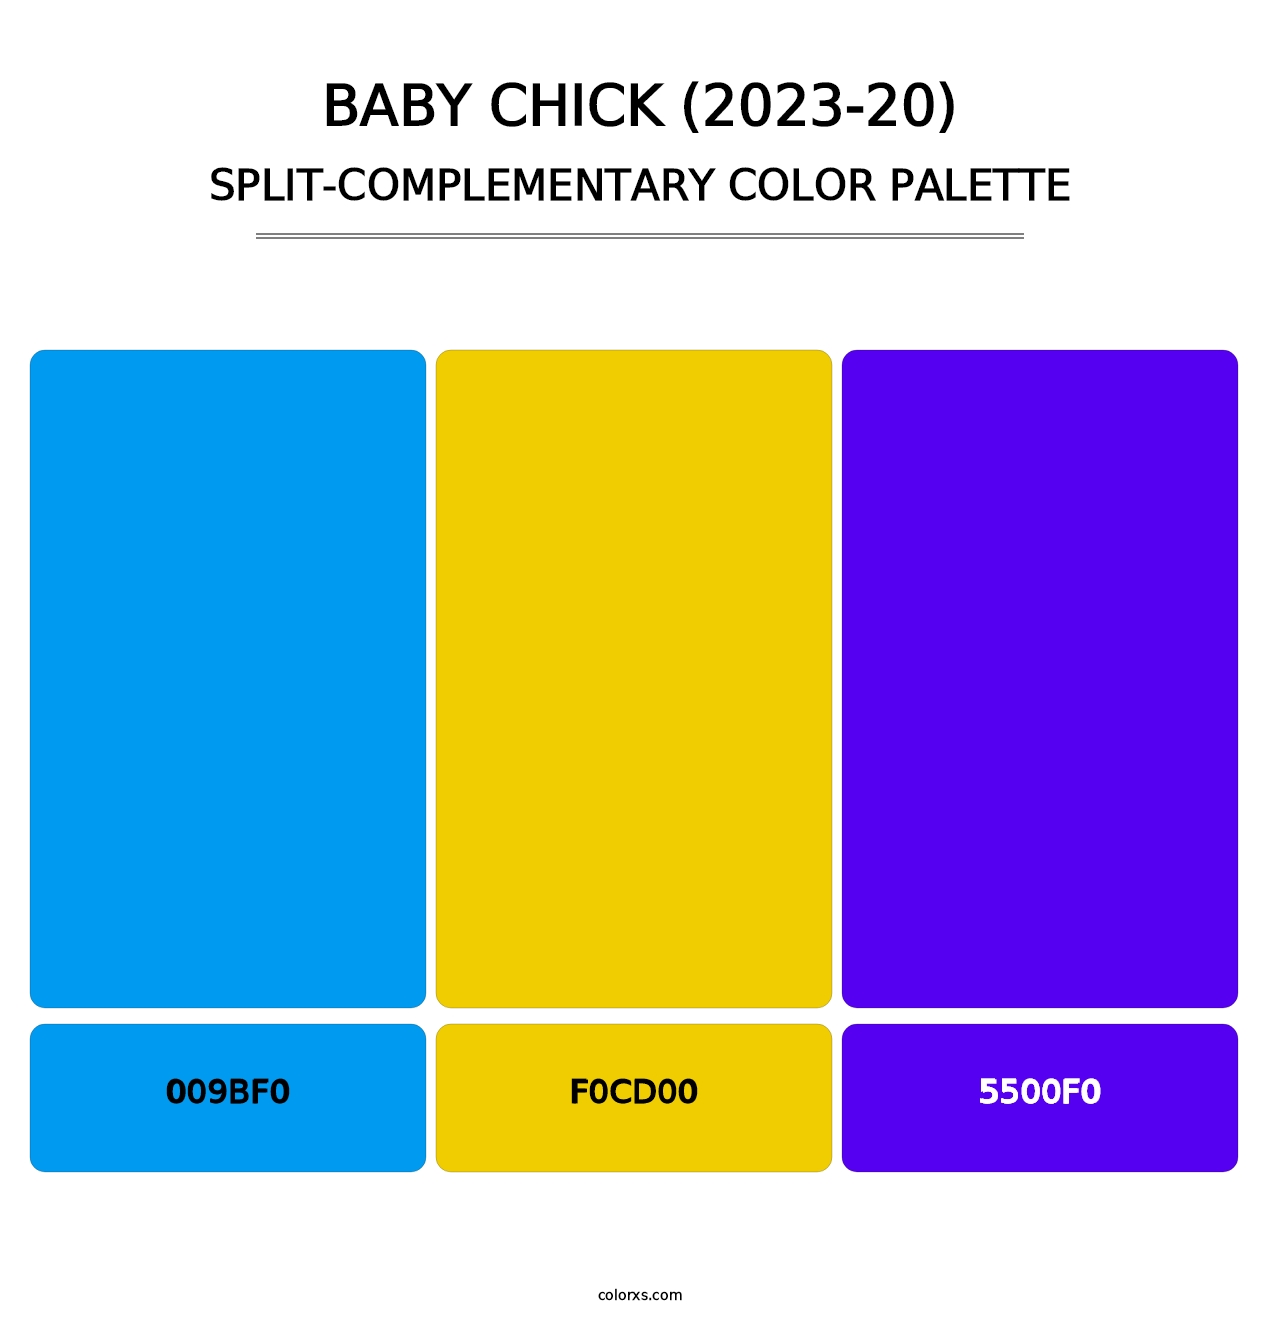 Baby Chick (2023-20) - Split-Complementary Color Palette